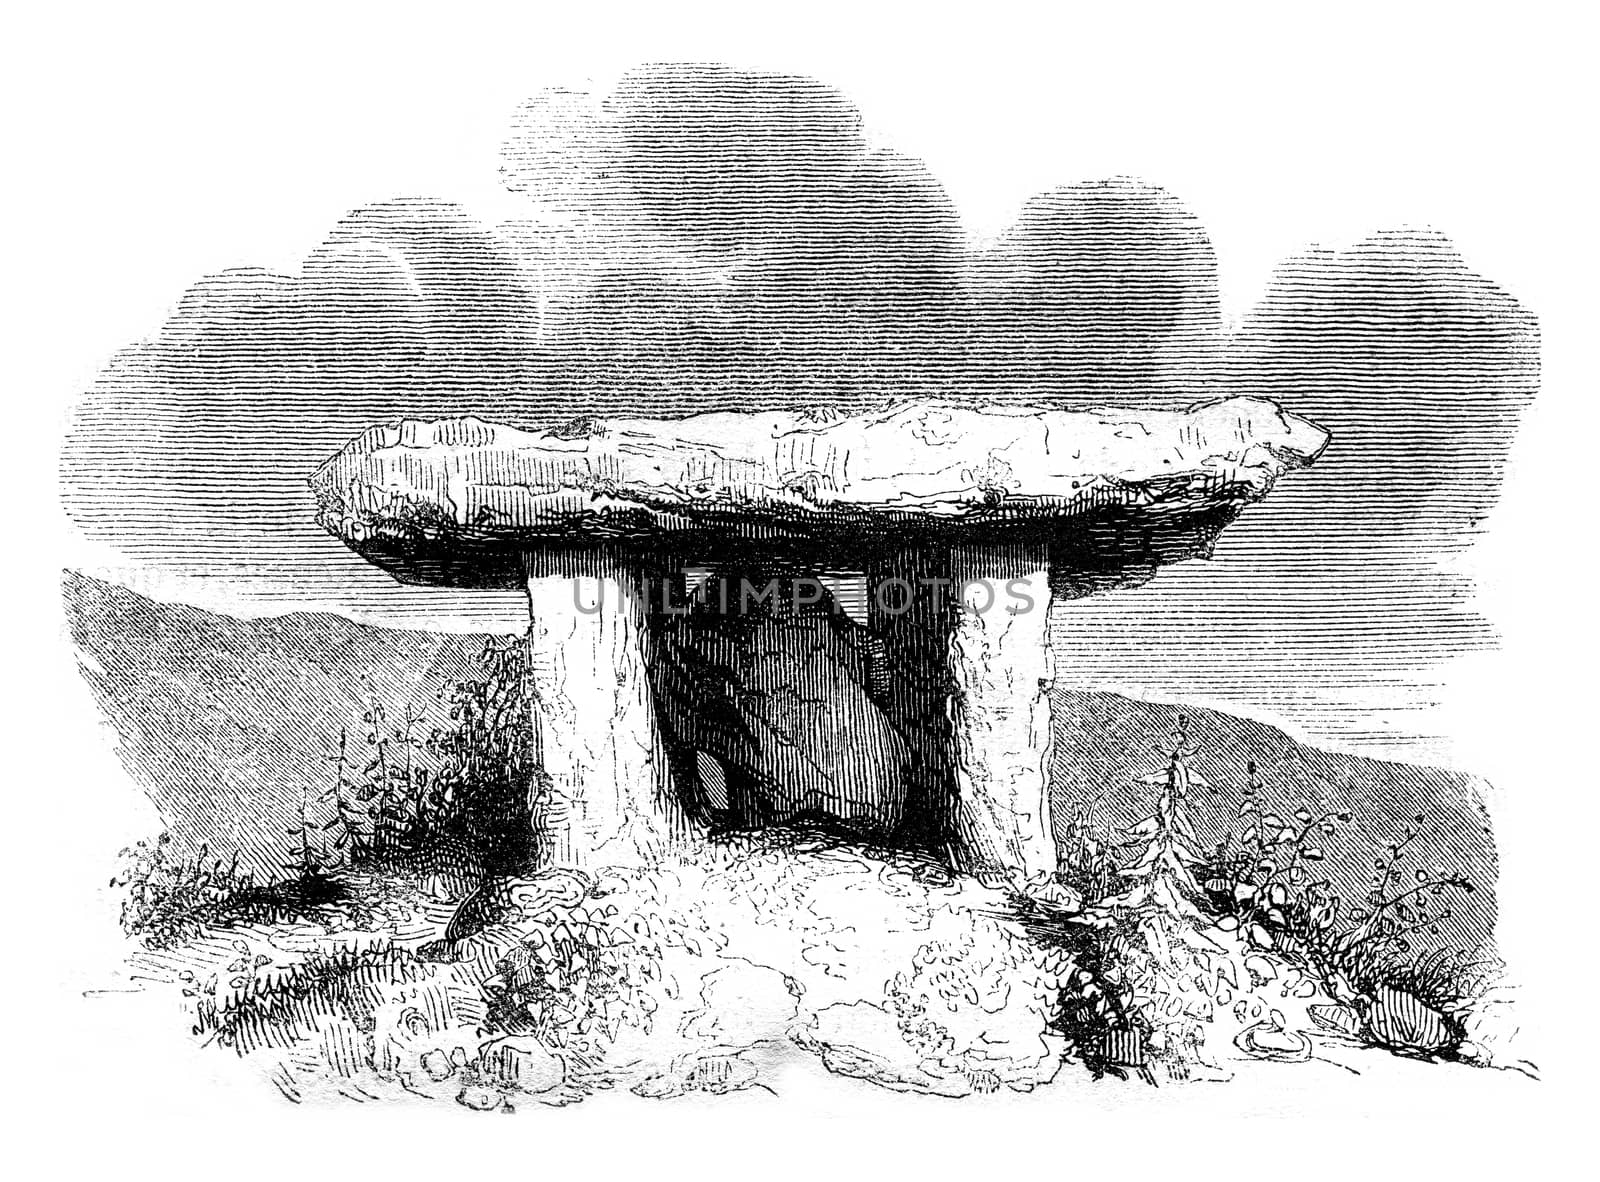 Druidic monument called dolmens, derives from the Antique Cabinet, vintage engraved illustration. Colorful History of England, 1837.
